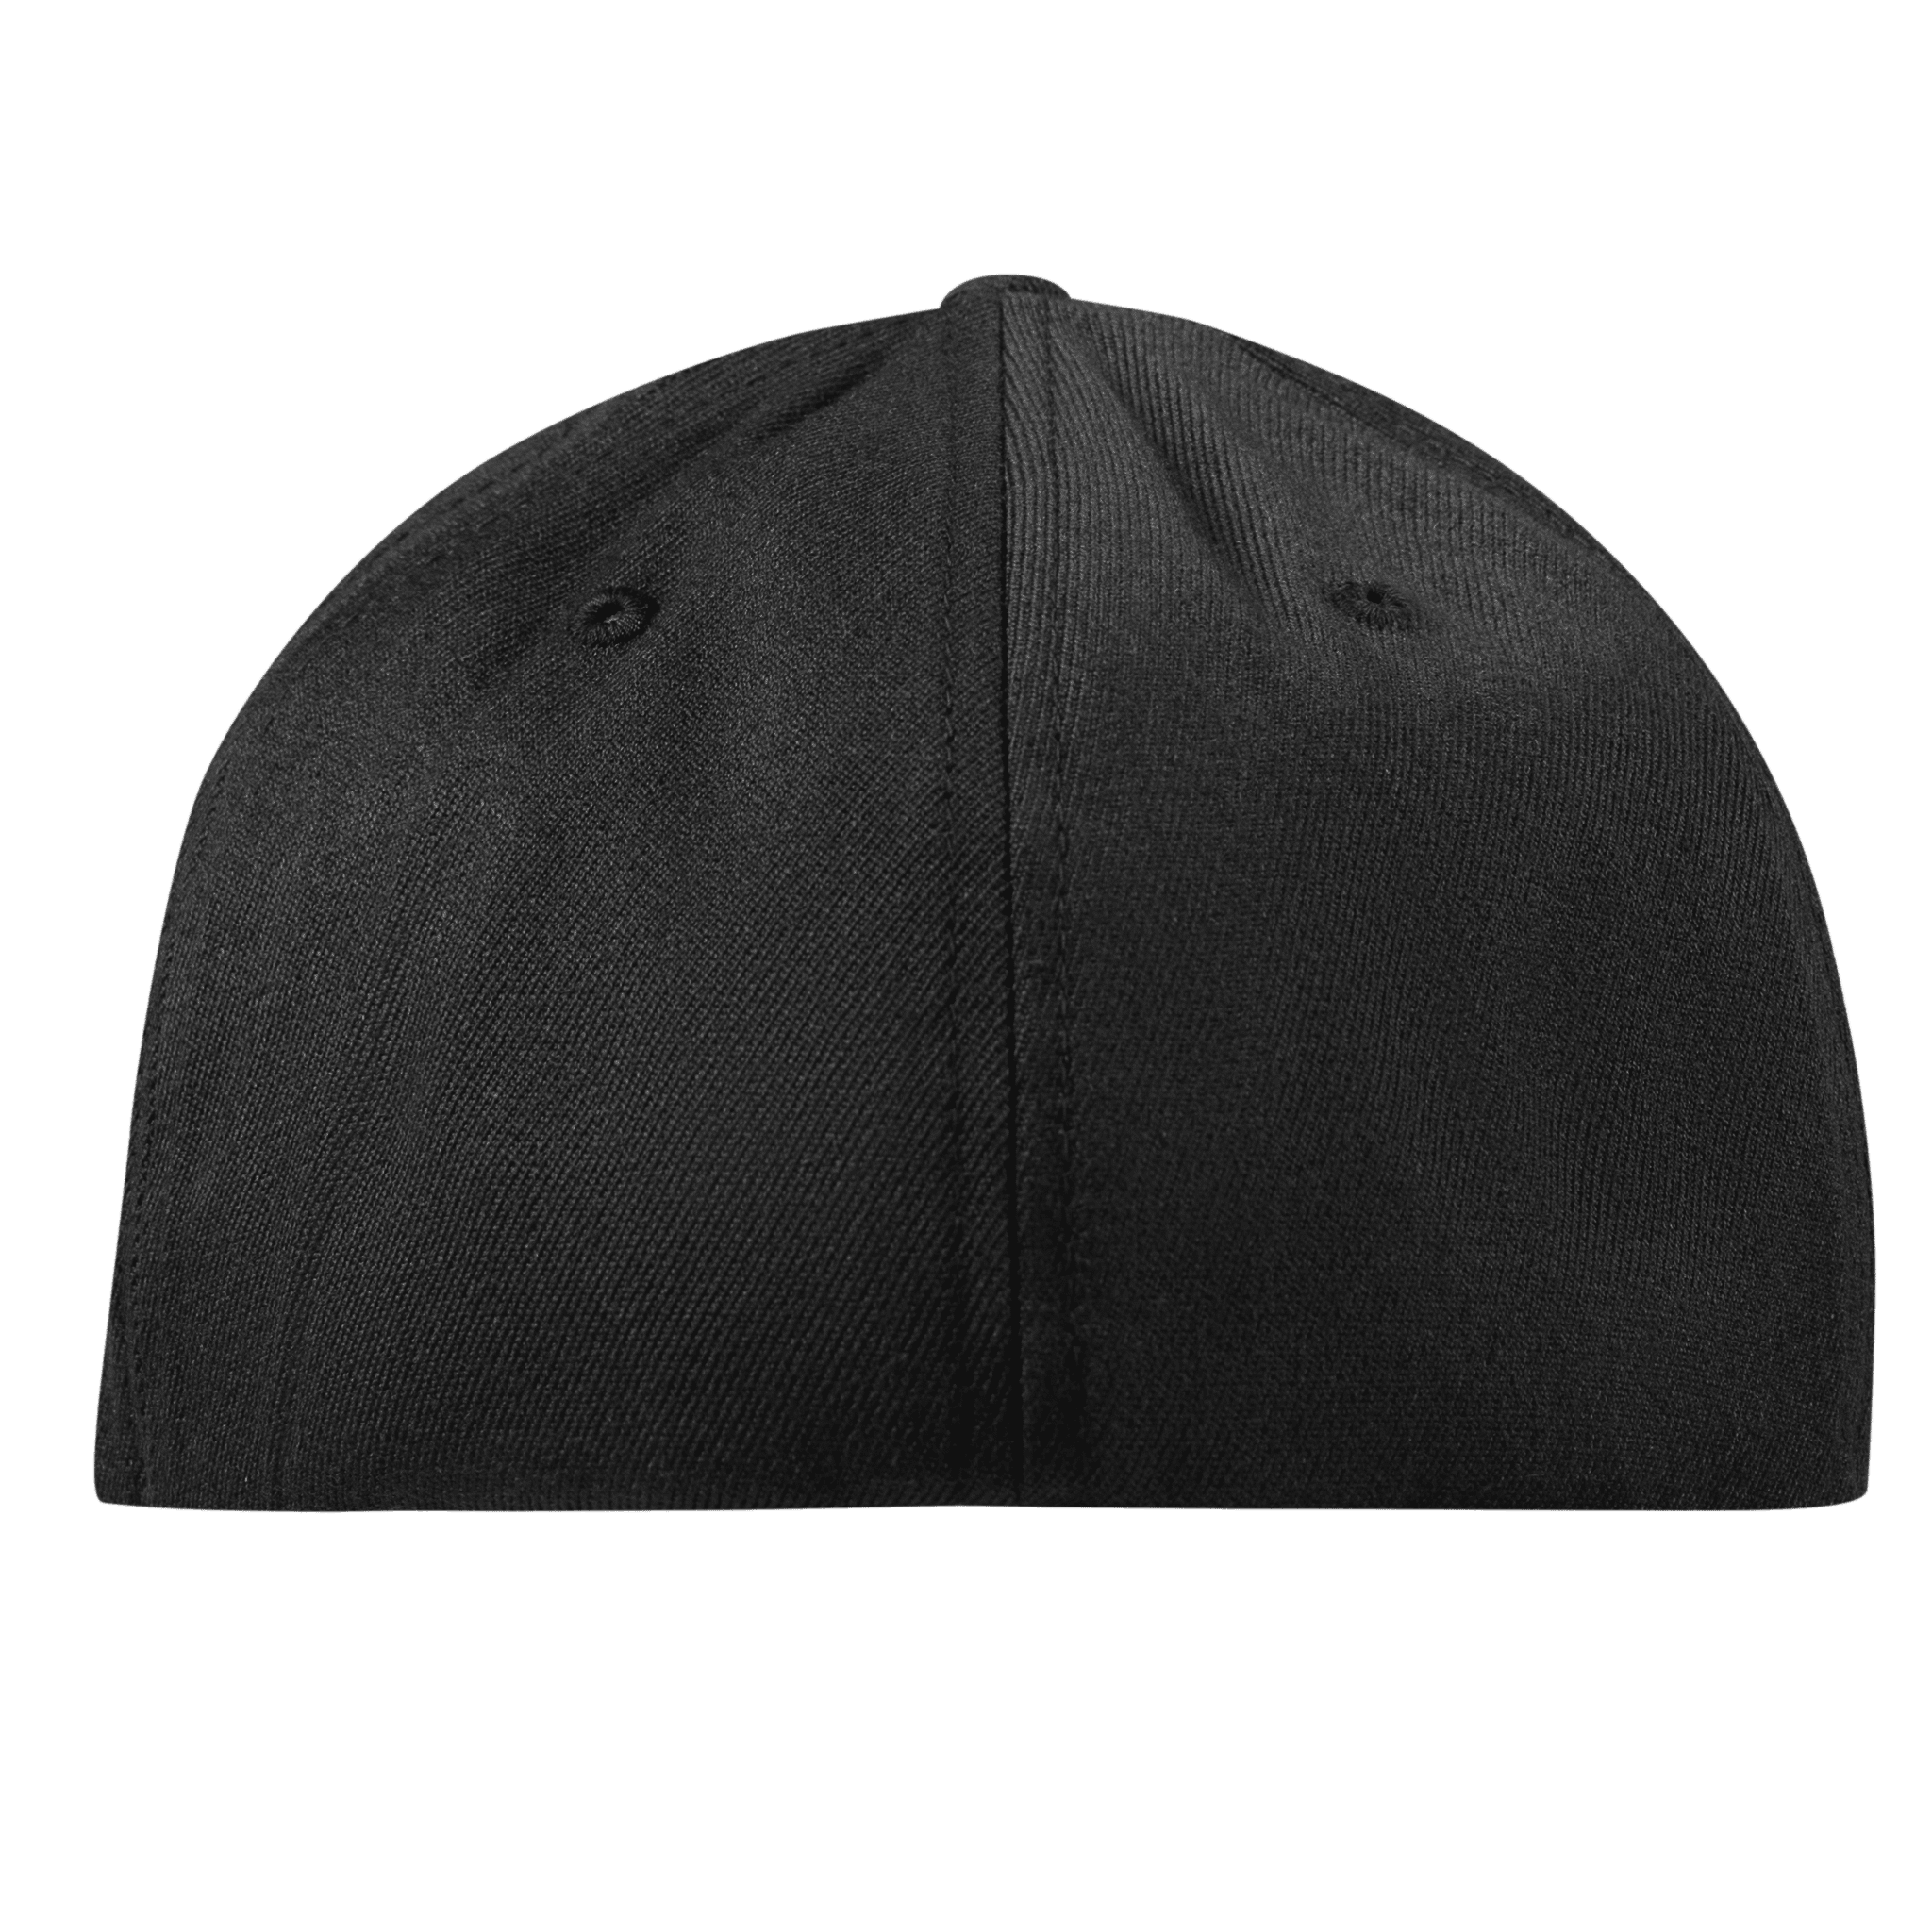 Wisconsin 30 PVC Flexfit Fitted Back Black